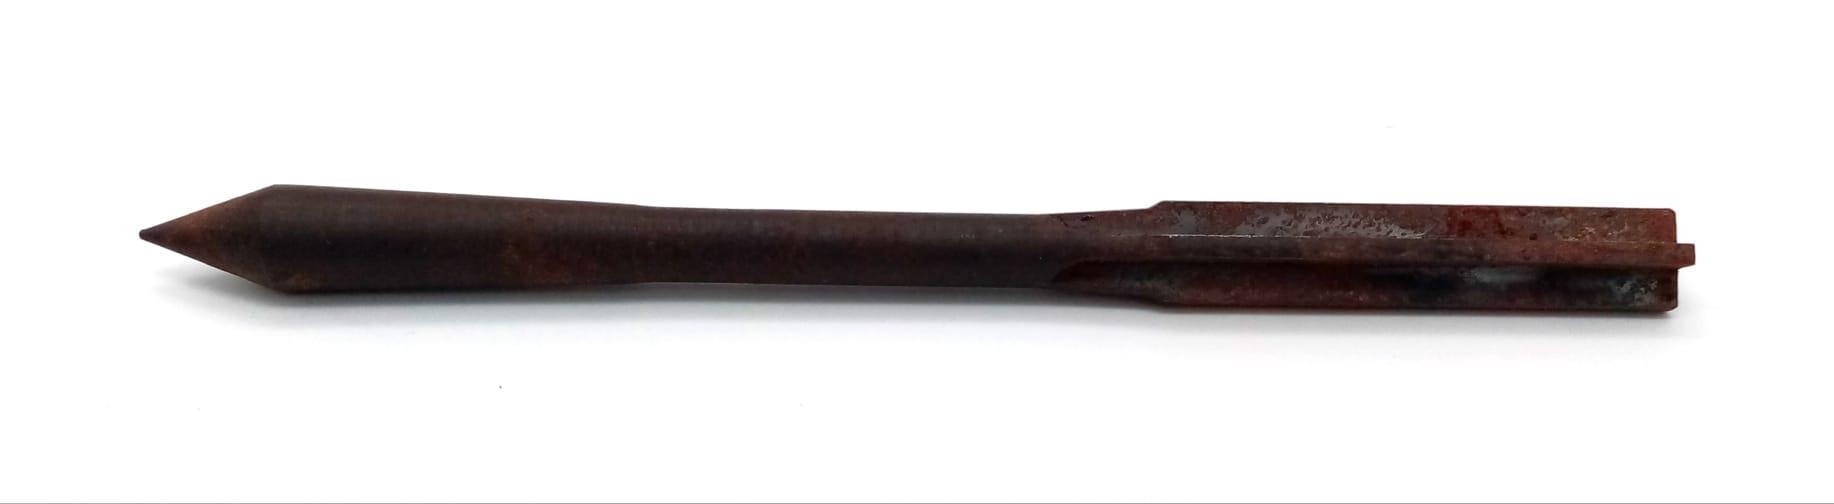 A VERY RARE WORLD WAR I GERMAN FLETCHETTE USED BY GERMAN AIRMEN TO DROP ON THE BRITISH TRENCHES. - Image 2 of 3